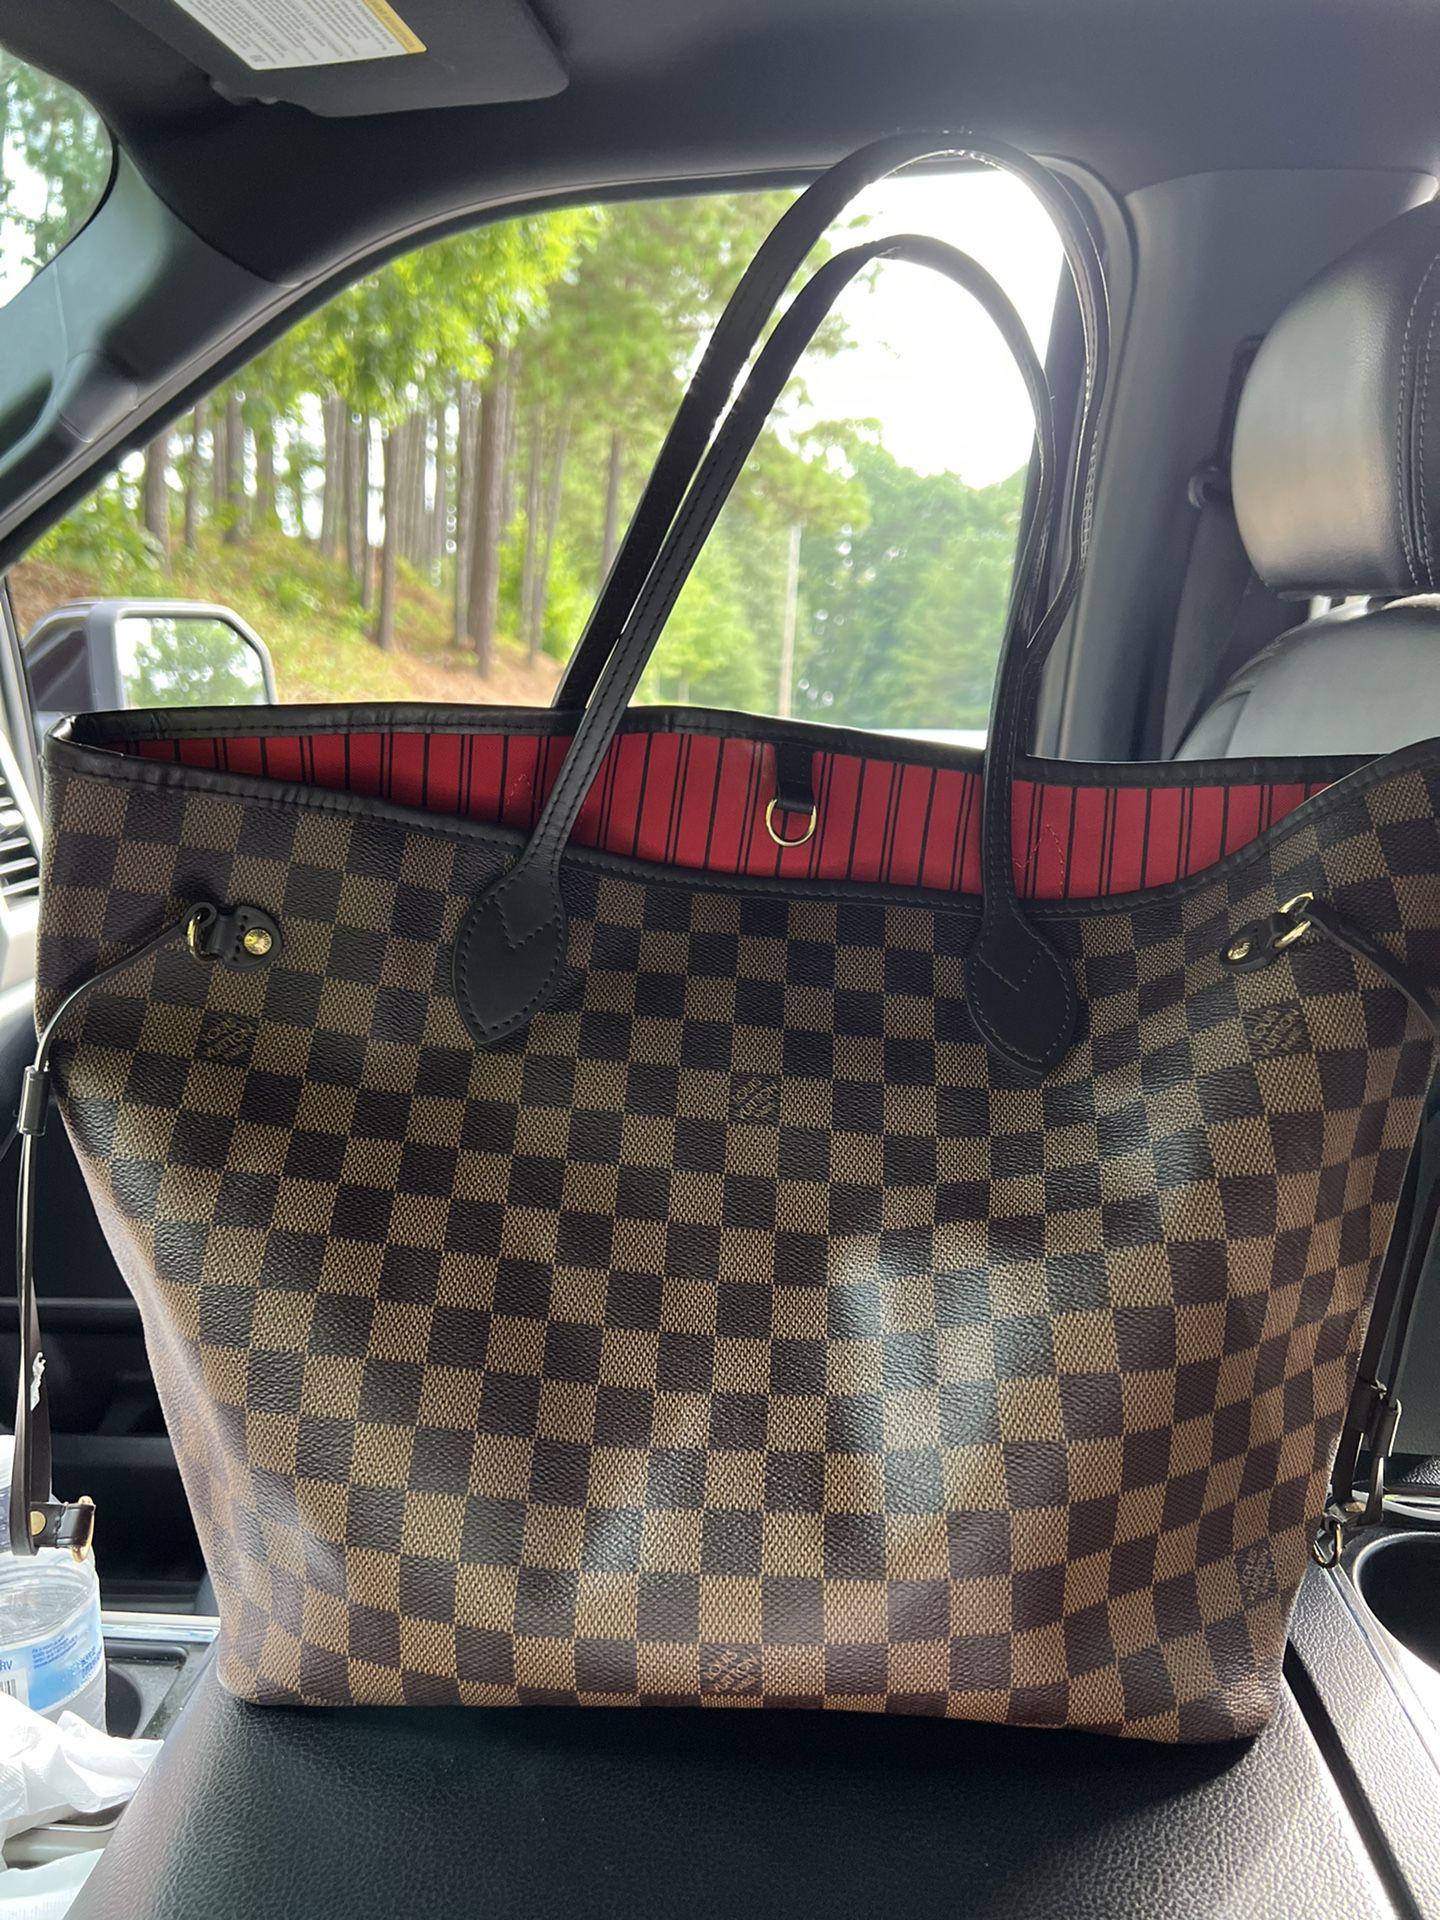 Used Louis Vuitton Bag for Sale in Atlanta, GA - OfferUp